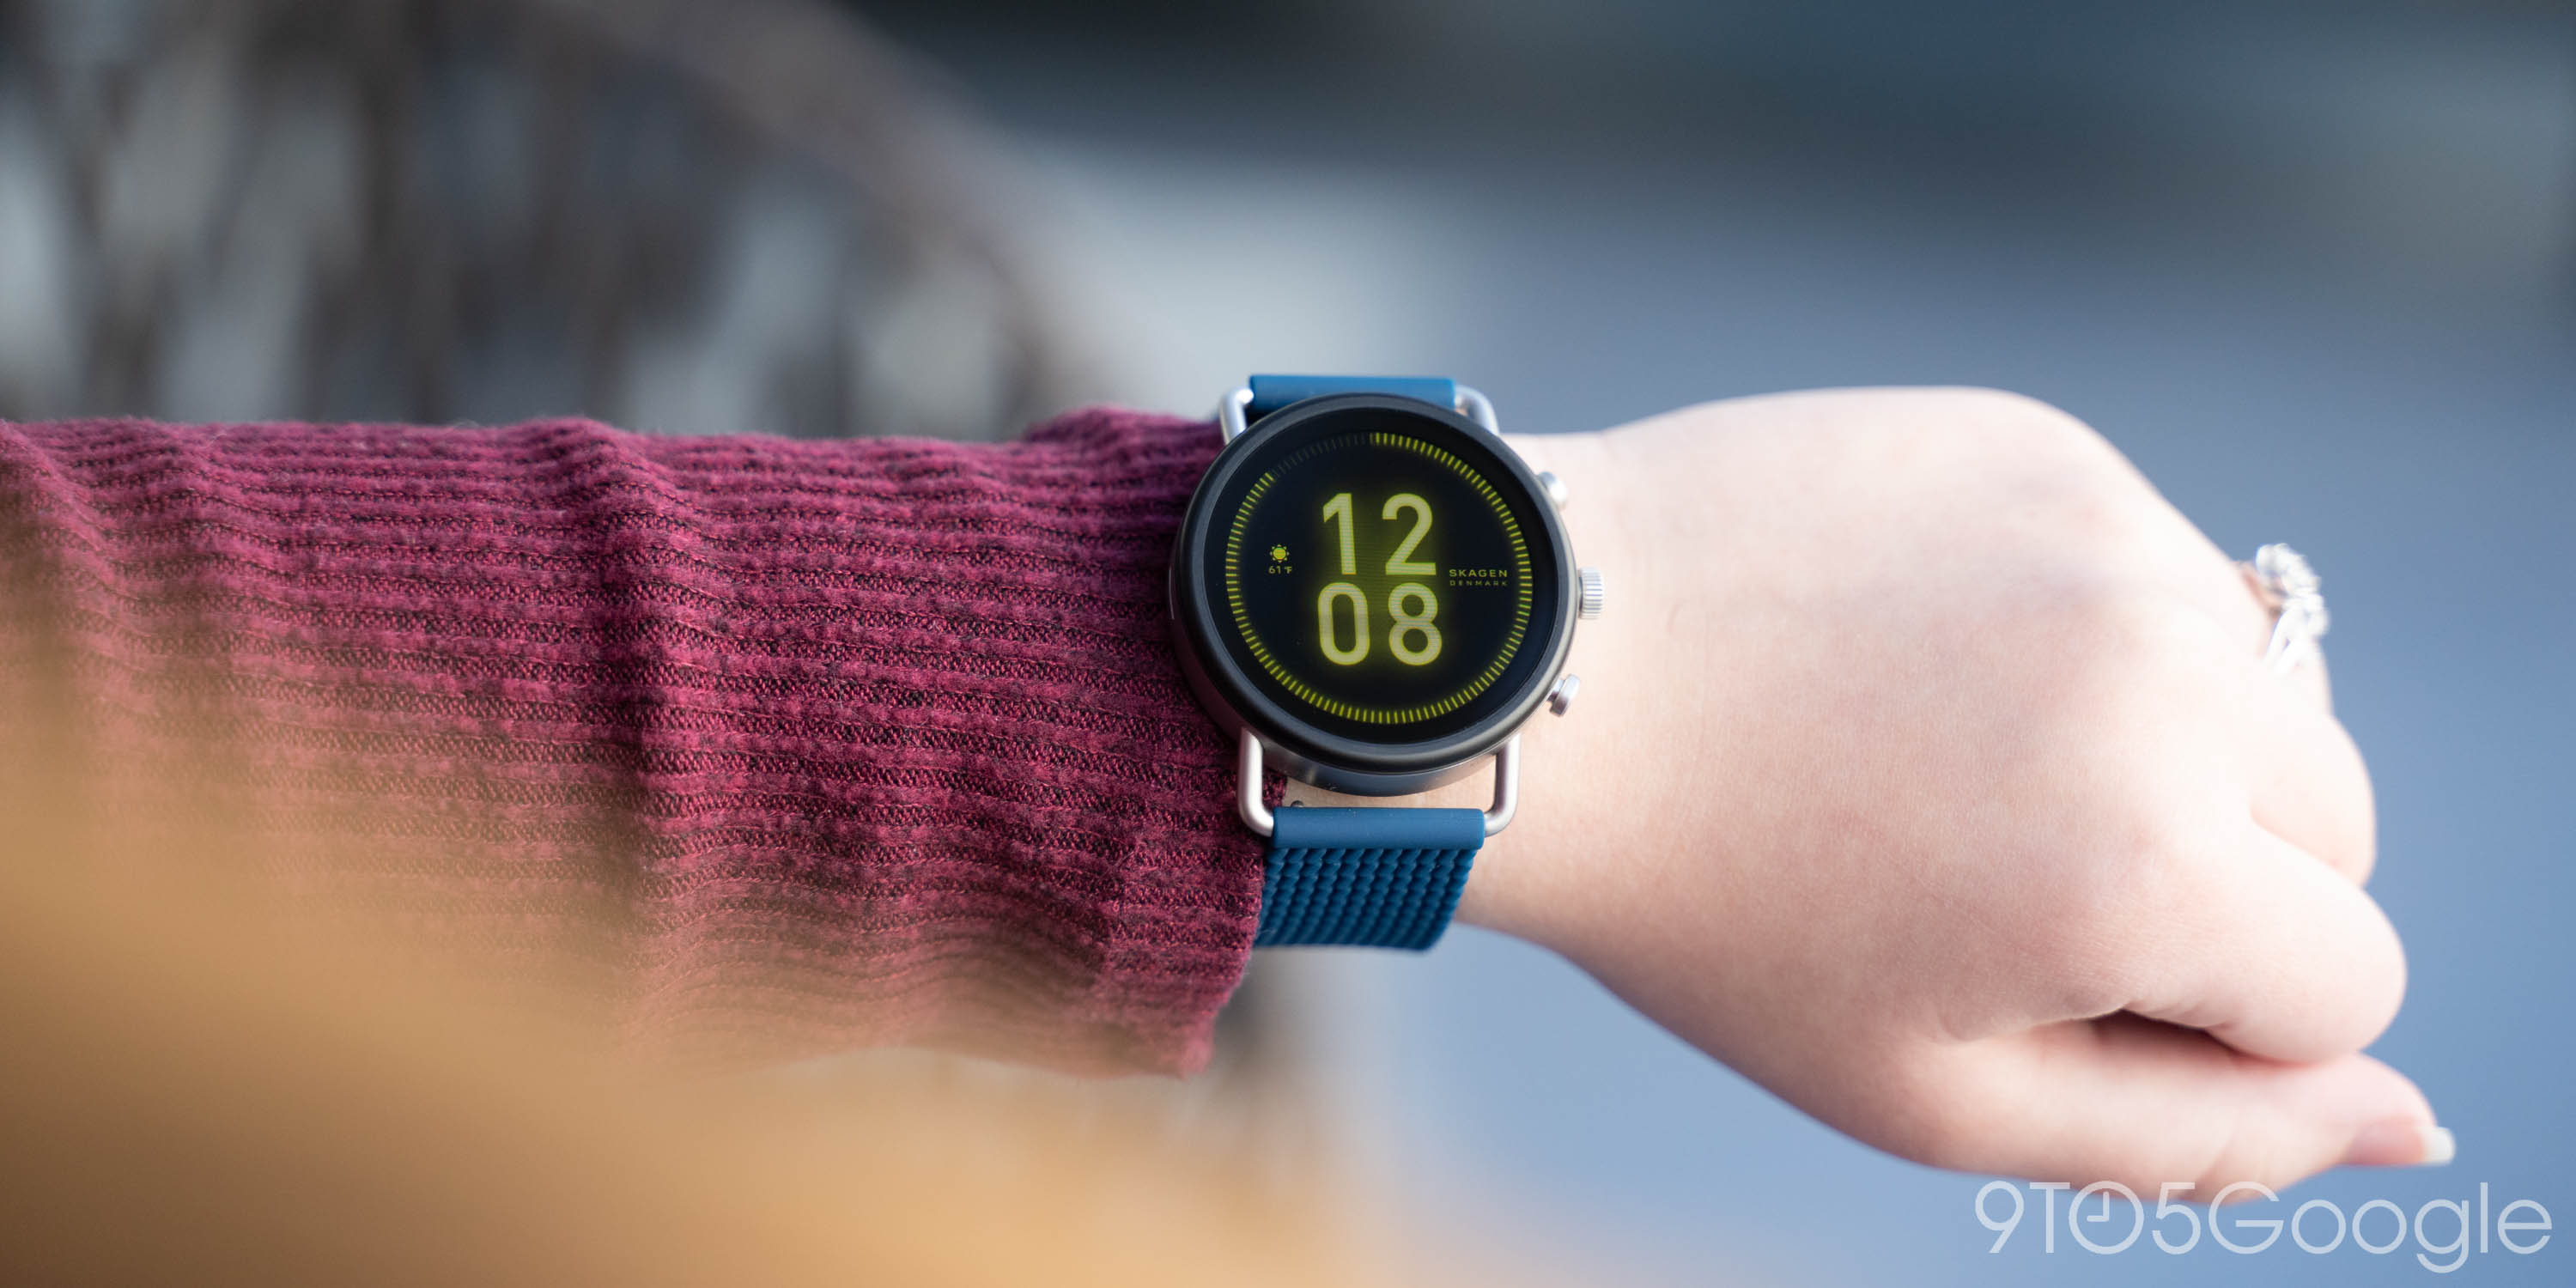 can you use google play music on fitbit versa